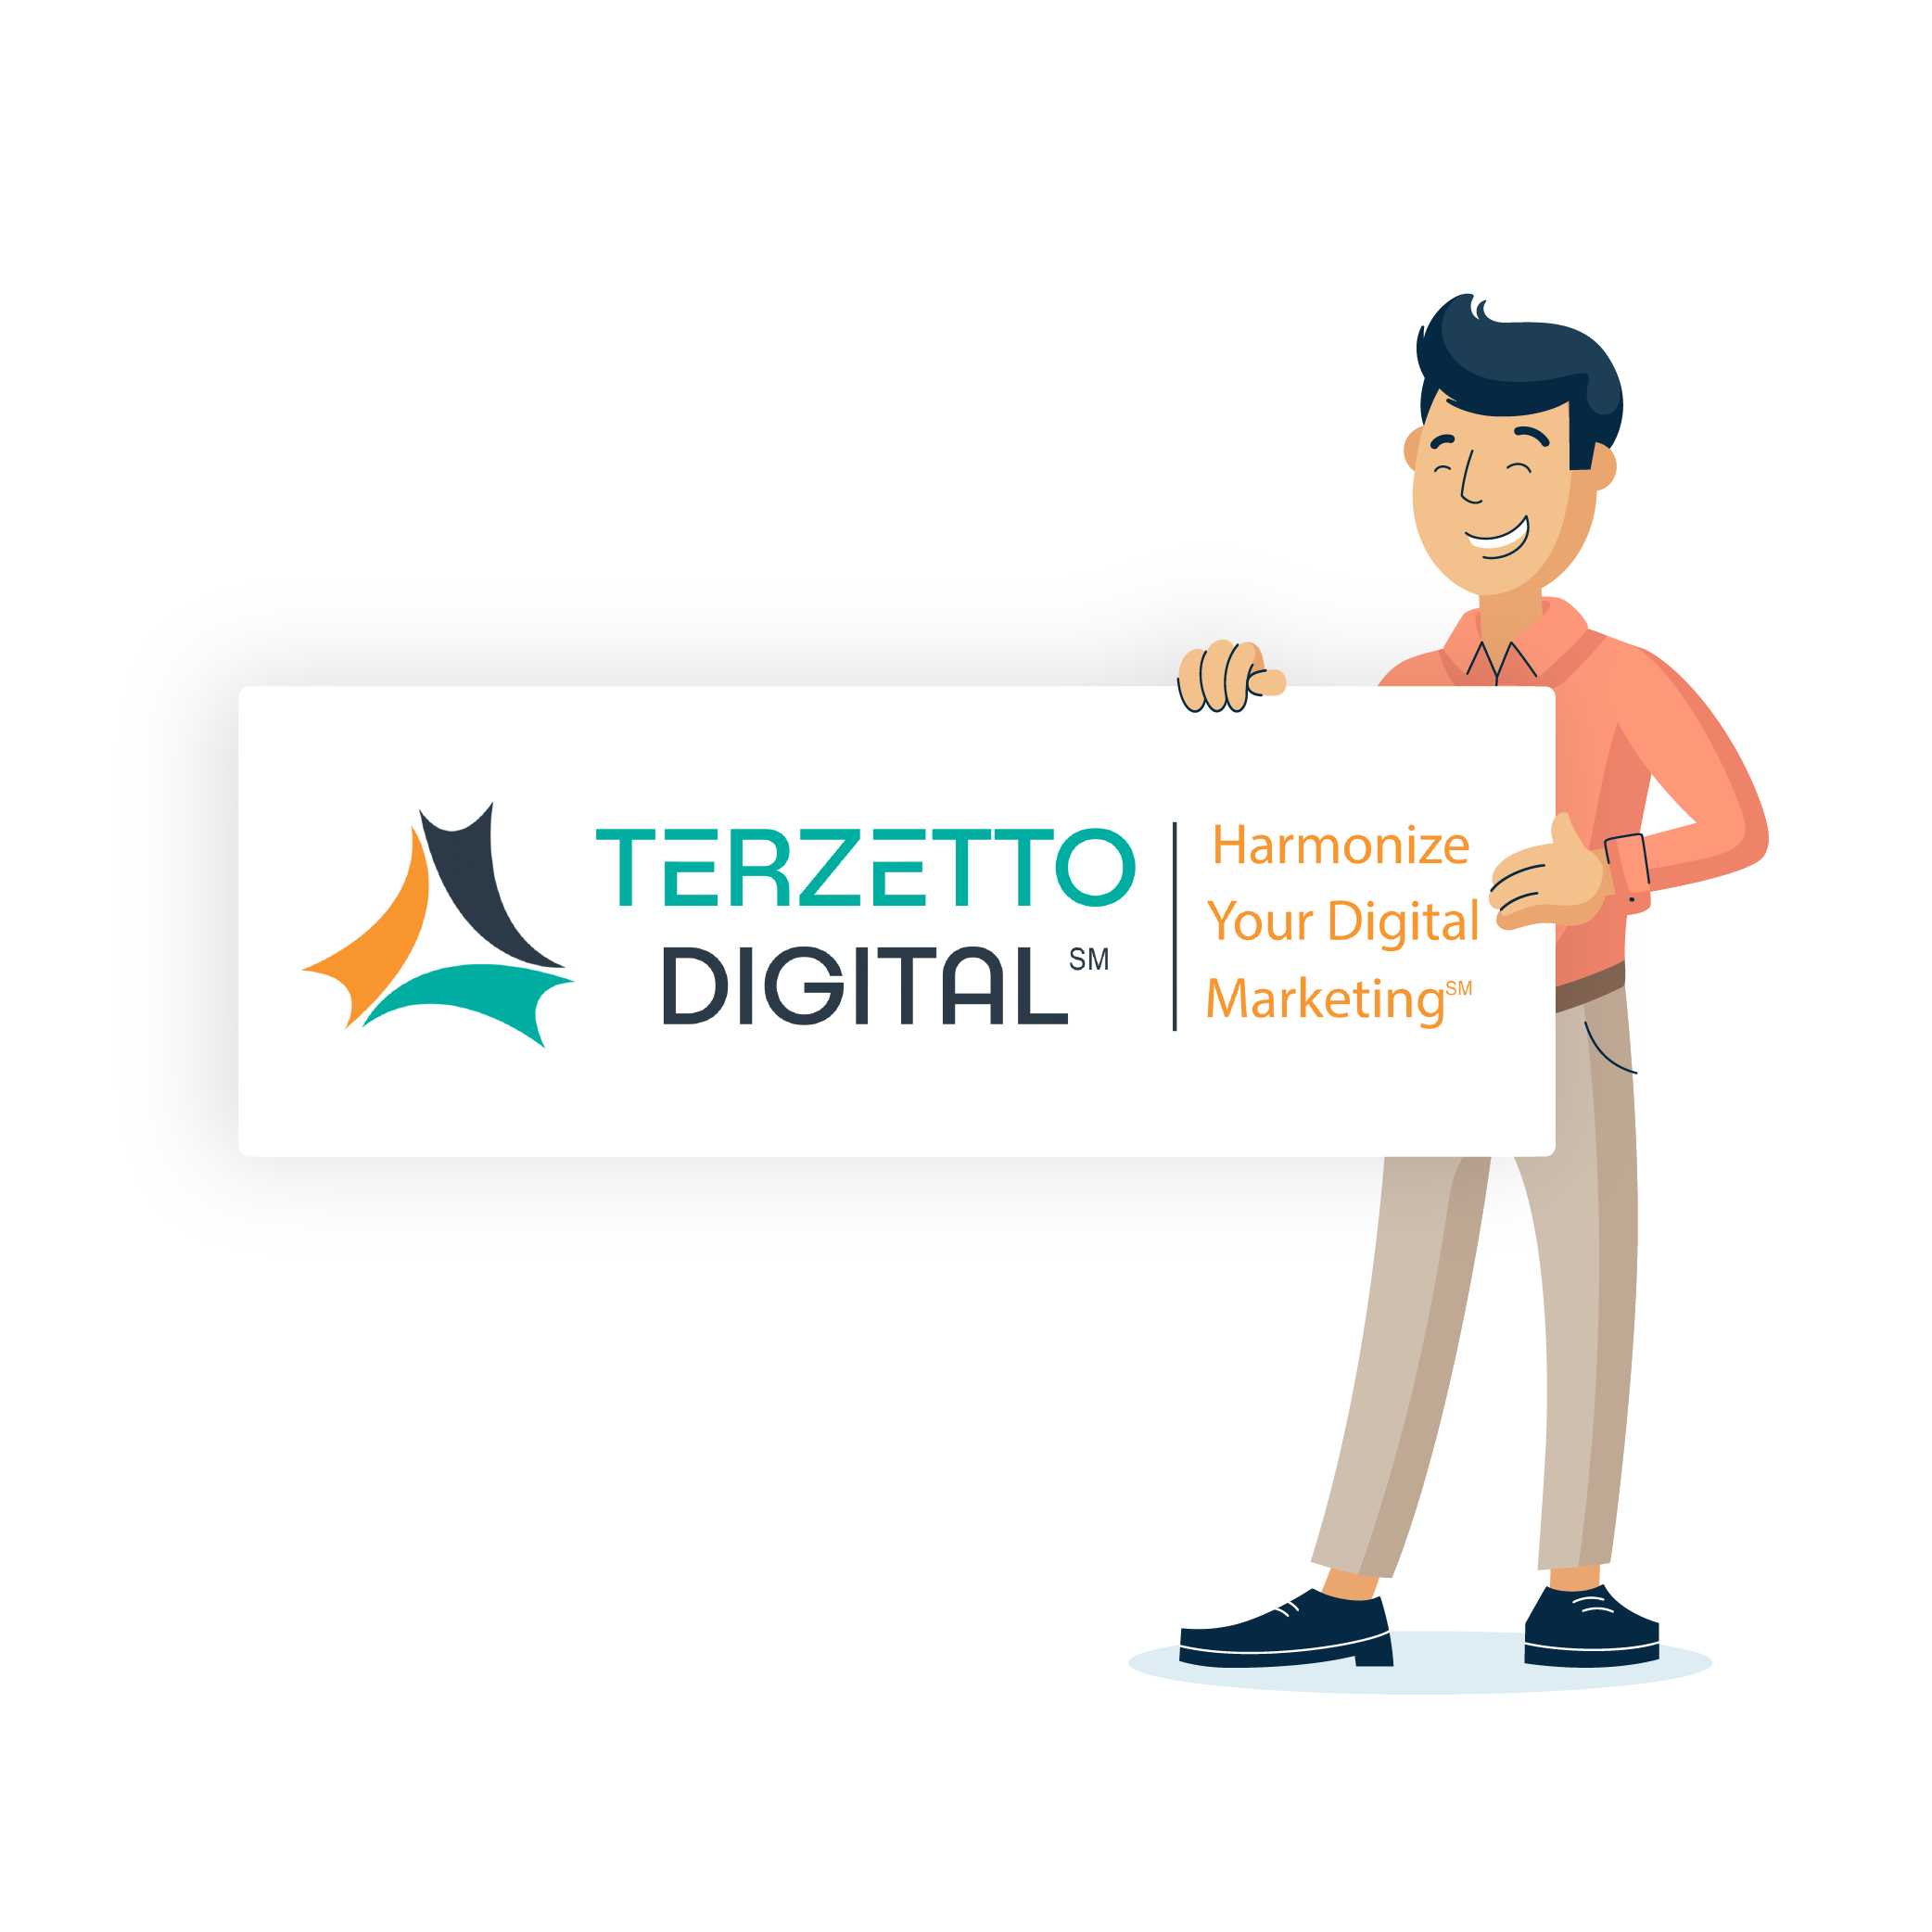  Illustration of Monsido staff holding a poster with the Terzetto Digital logo - Harmonize Your Digital Marketing